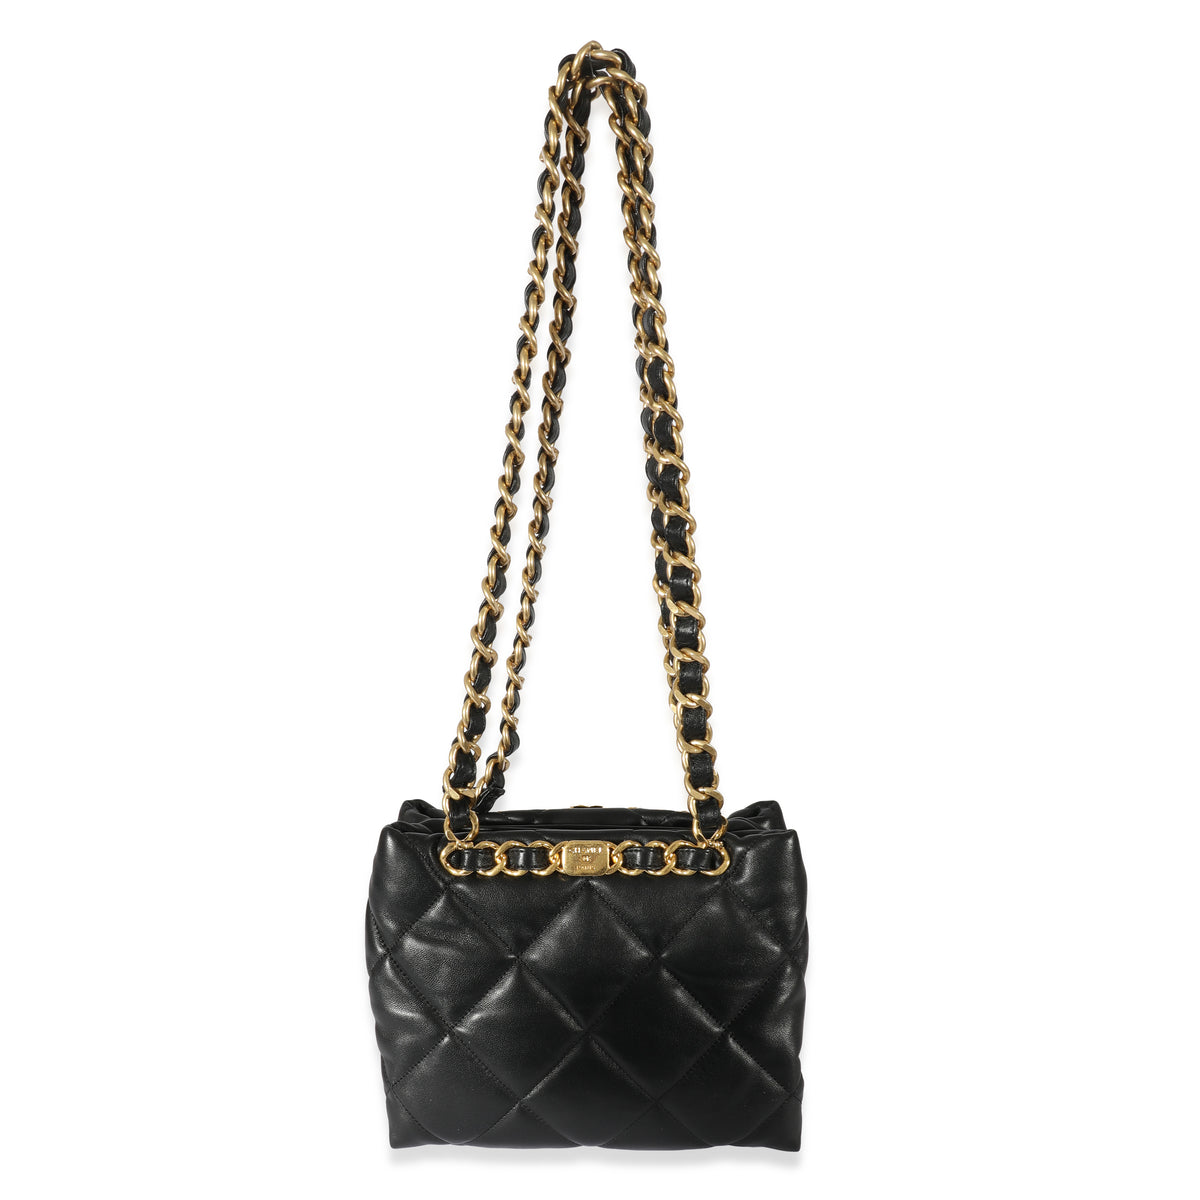 Chanel Black Quilted Patent Leather Chain Pochette, myGemma